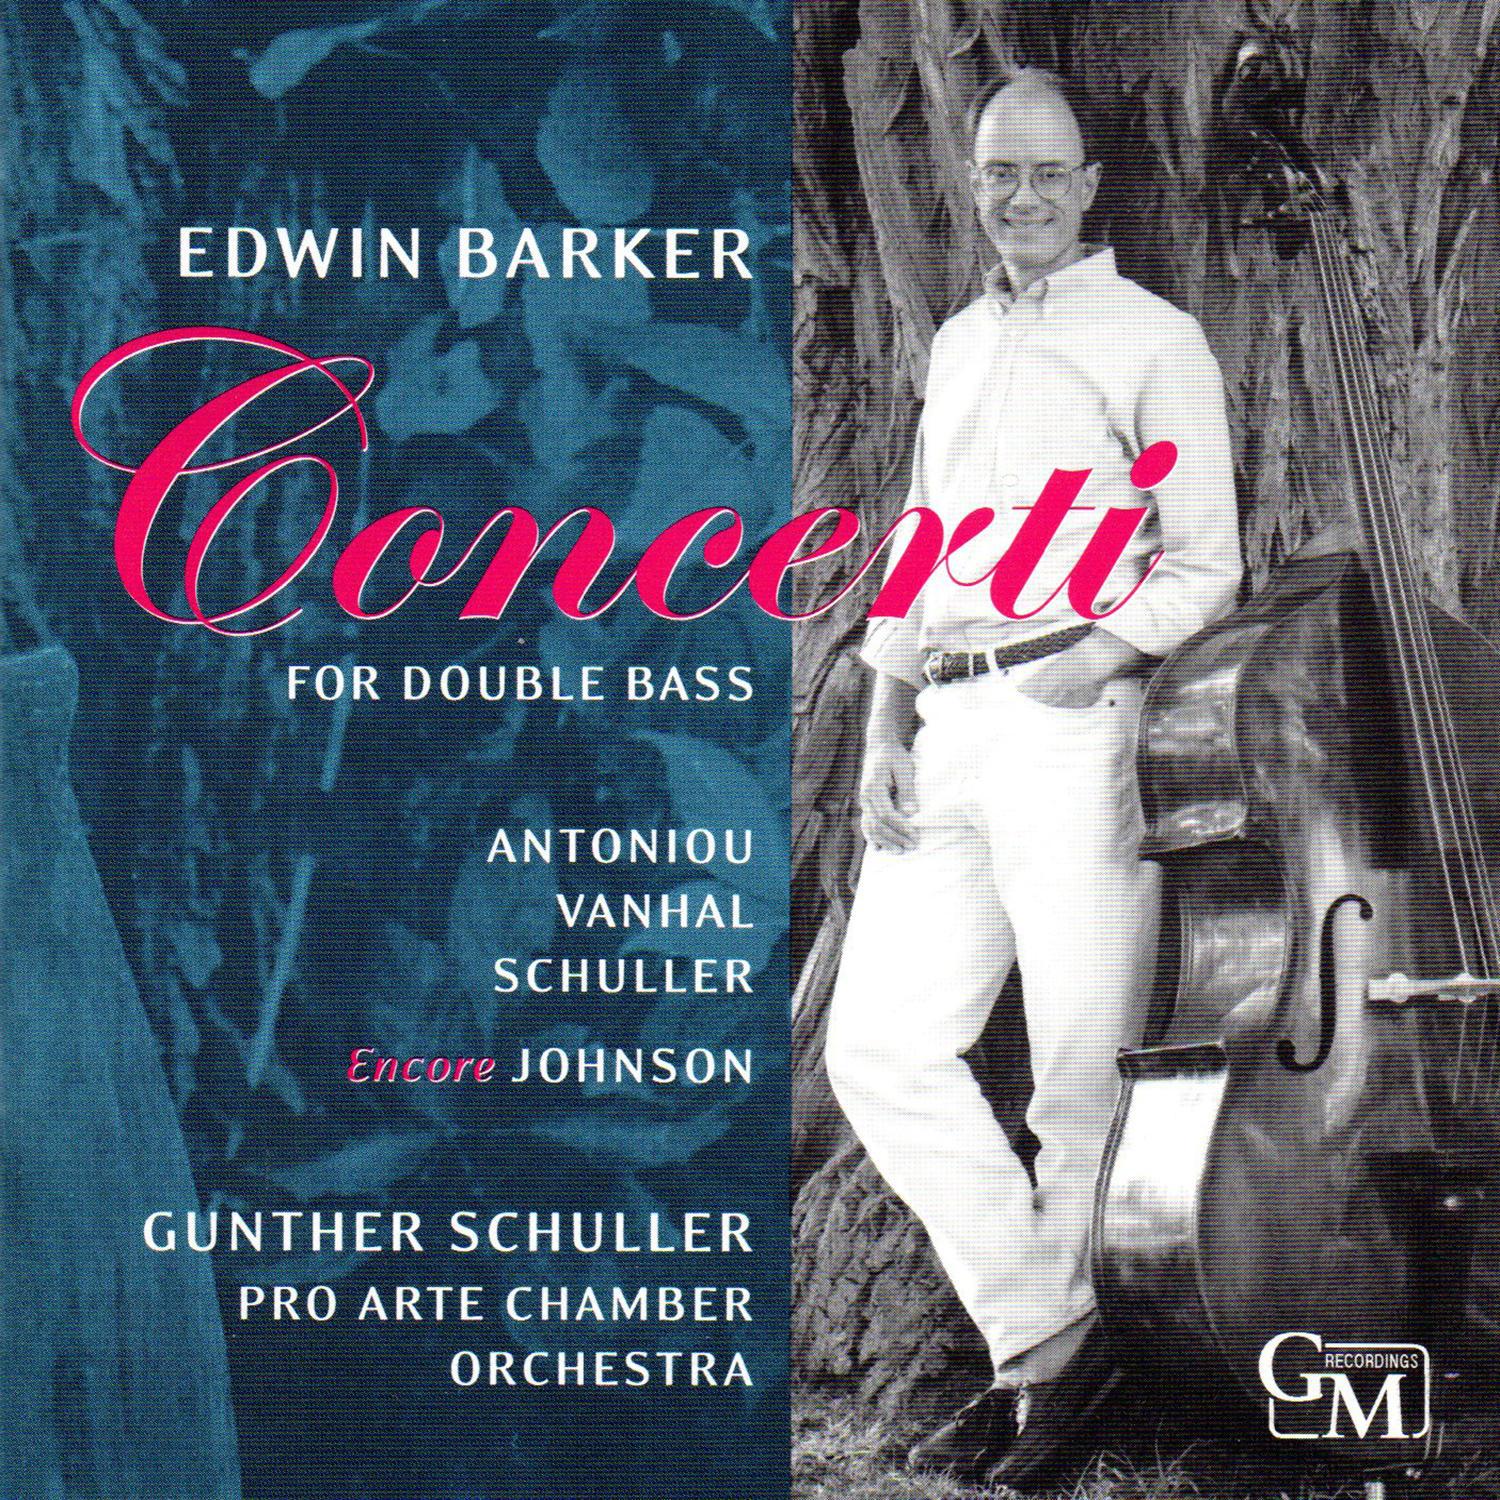 Concerto in D Major for Double Bass and Orchestra: II. Adagio